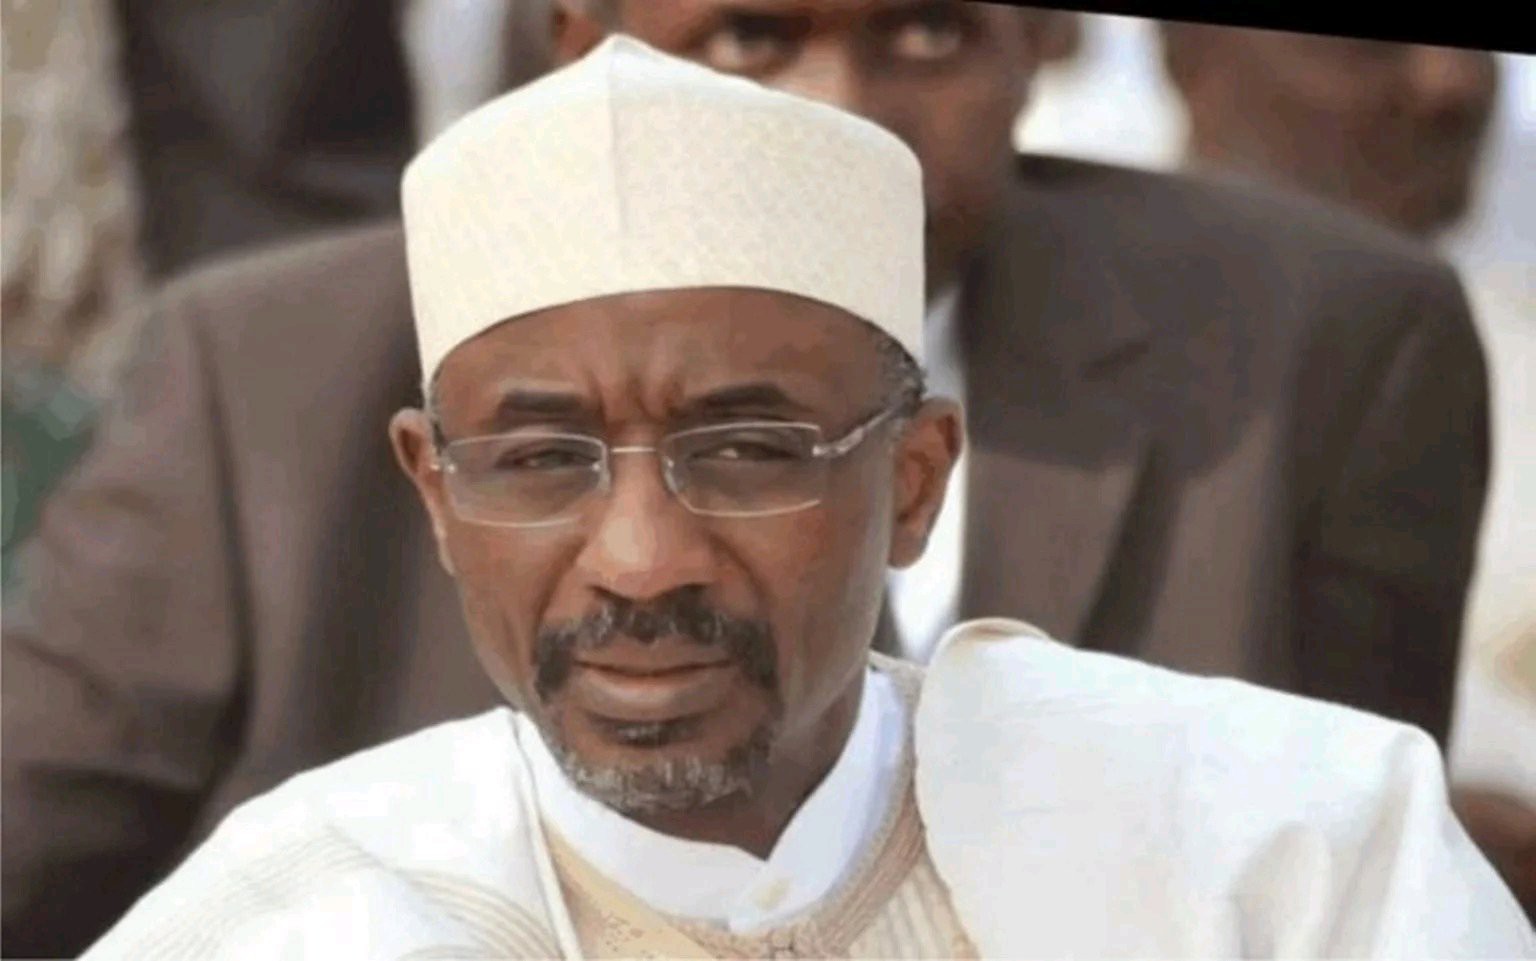 CBN Relocation: Abuja Is A Federal Capital Not Northern Issue, The Noise Should Be Ignored - According to Sanusi